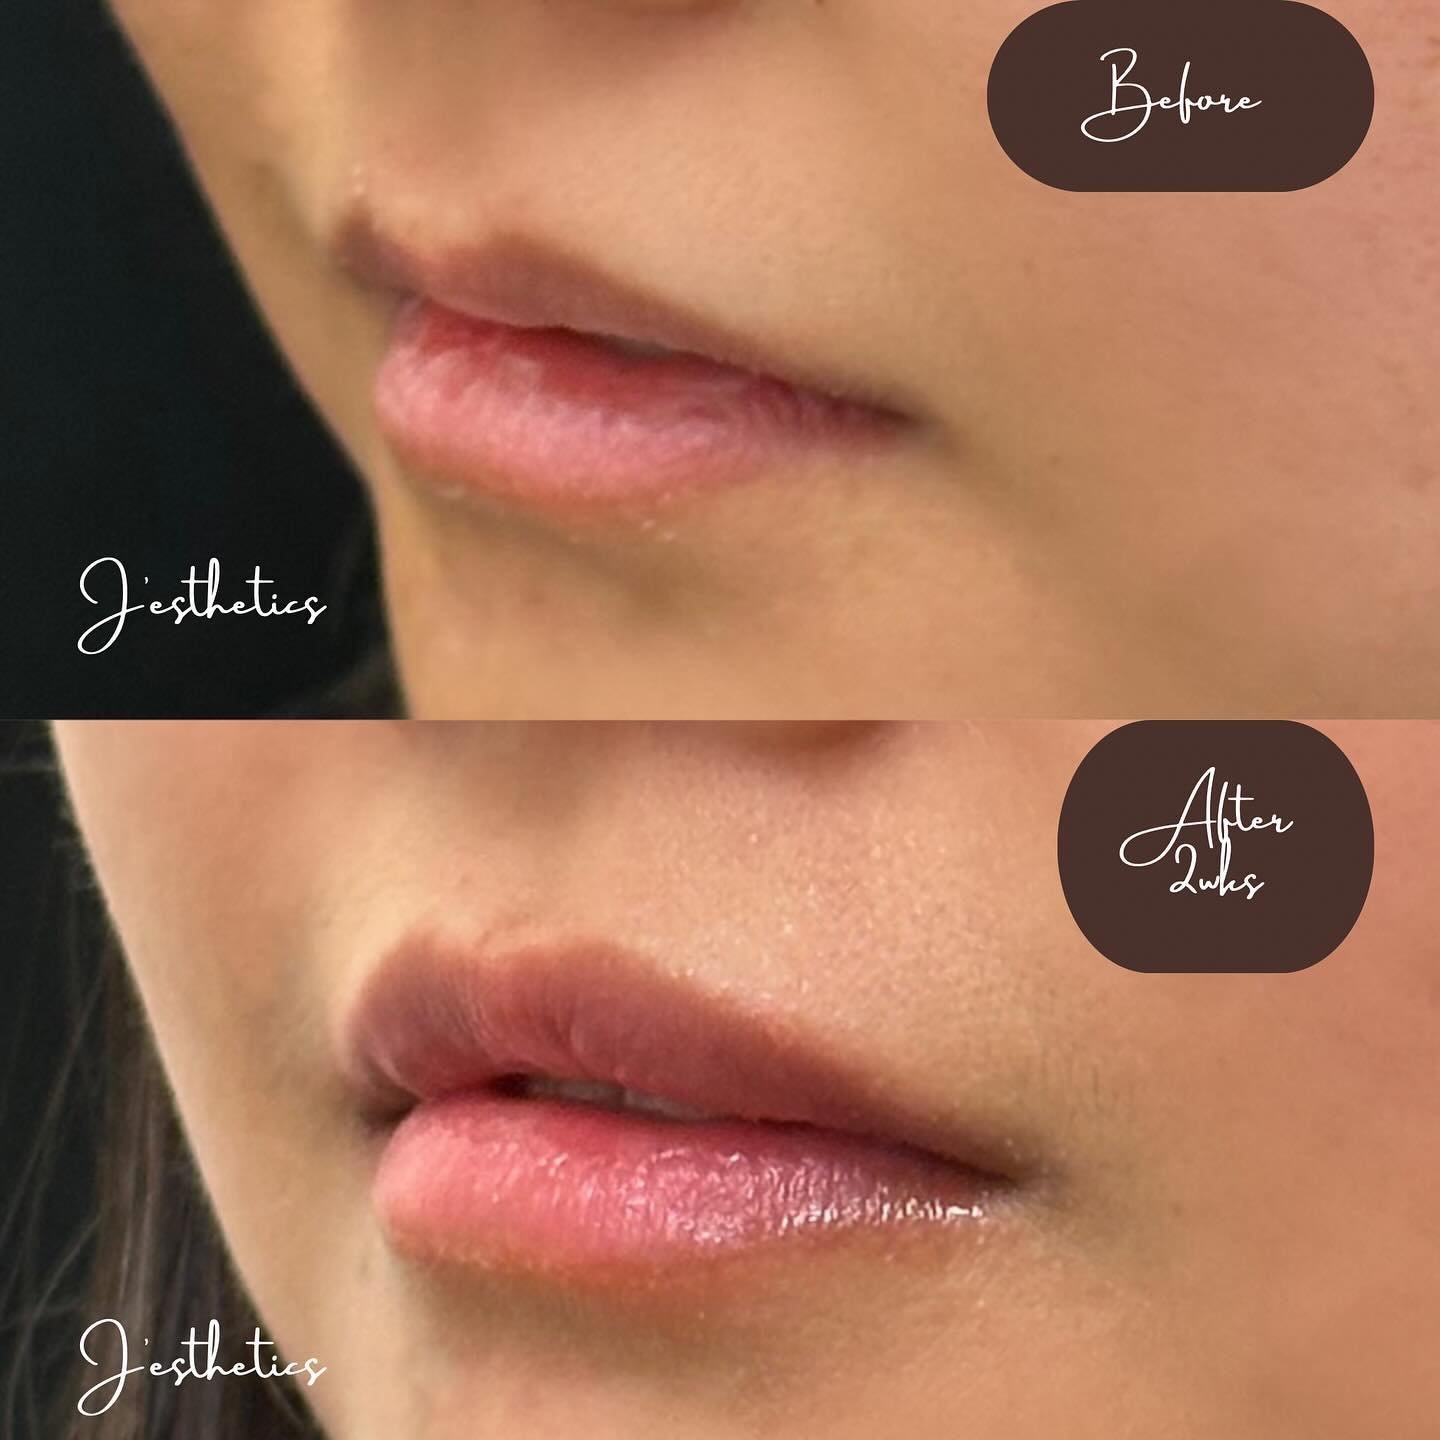 💋 Lips by J&rsquo;esthetics 💋
Our brand aims to enhance your beauty keeping it natural (no 🦆, no overfilling in our medspa)

Our first-time client placed her trust in us, allowing us to sculpt her lips with finesse and precision. With our expertis